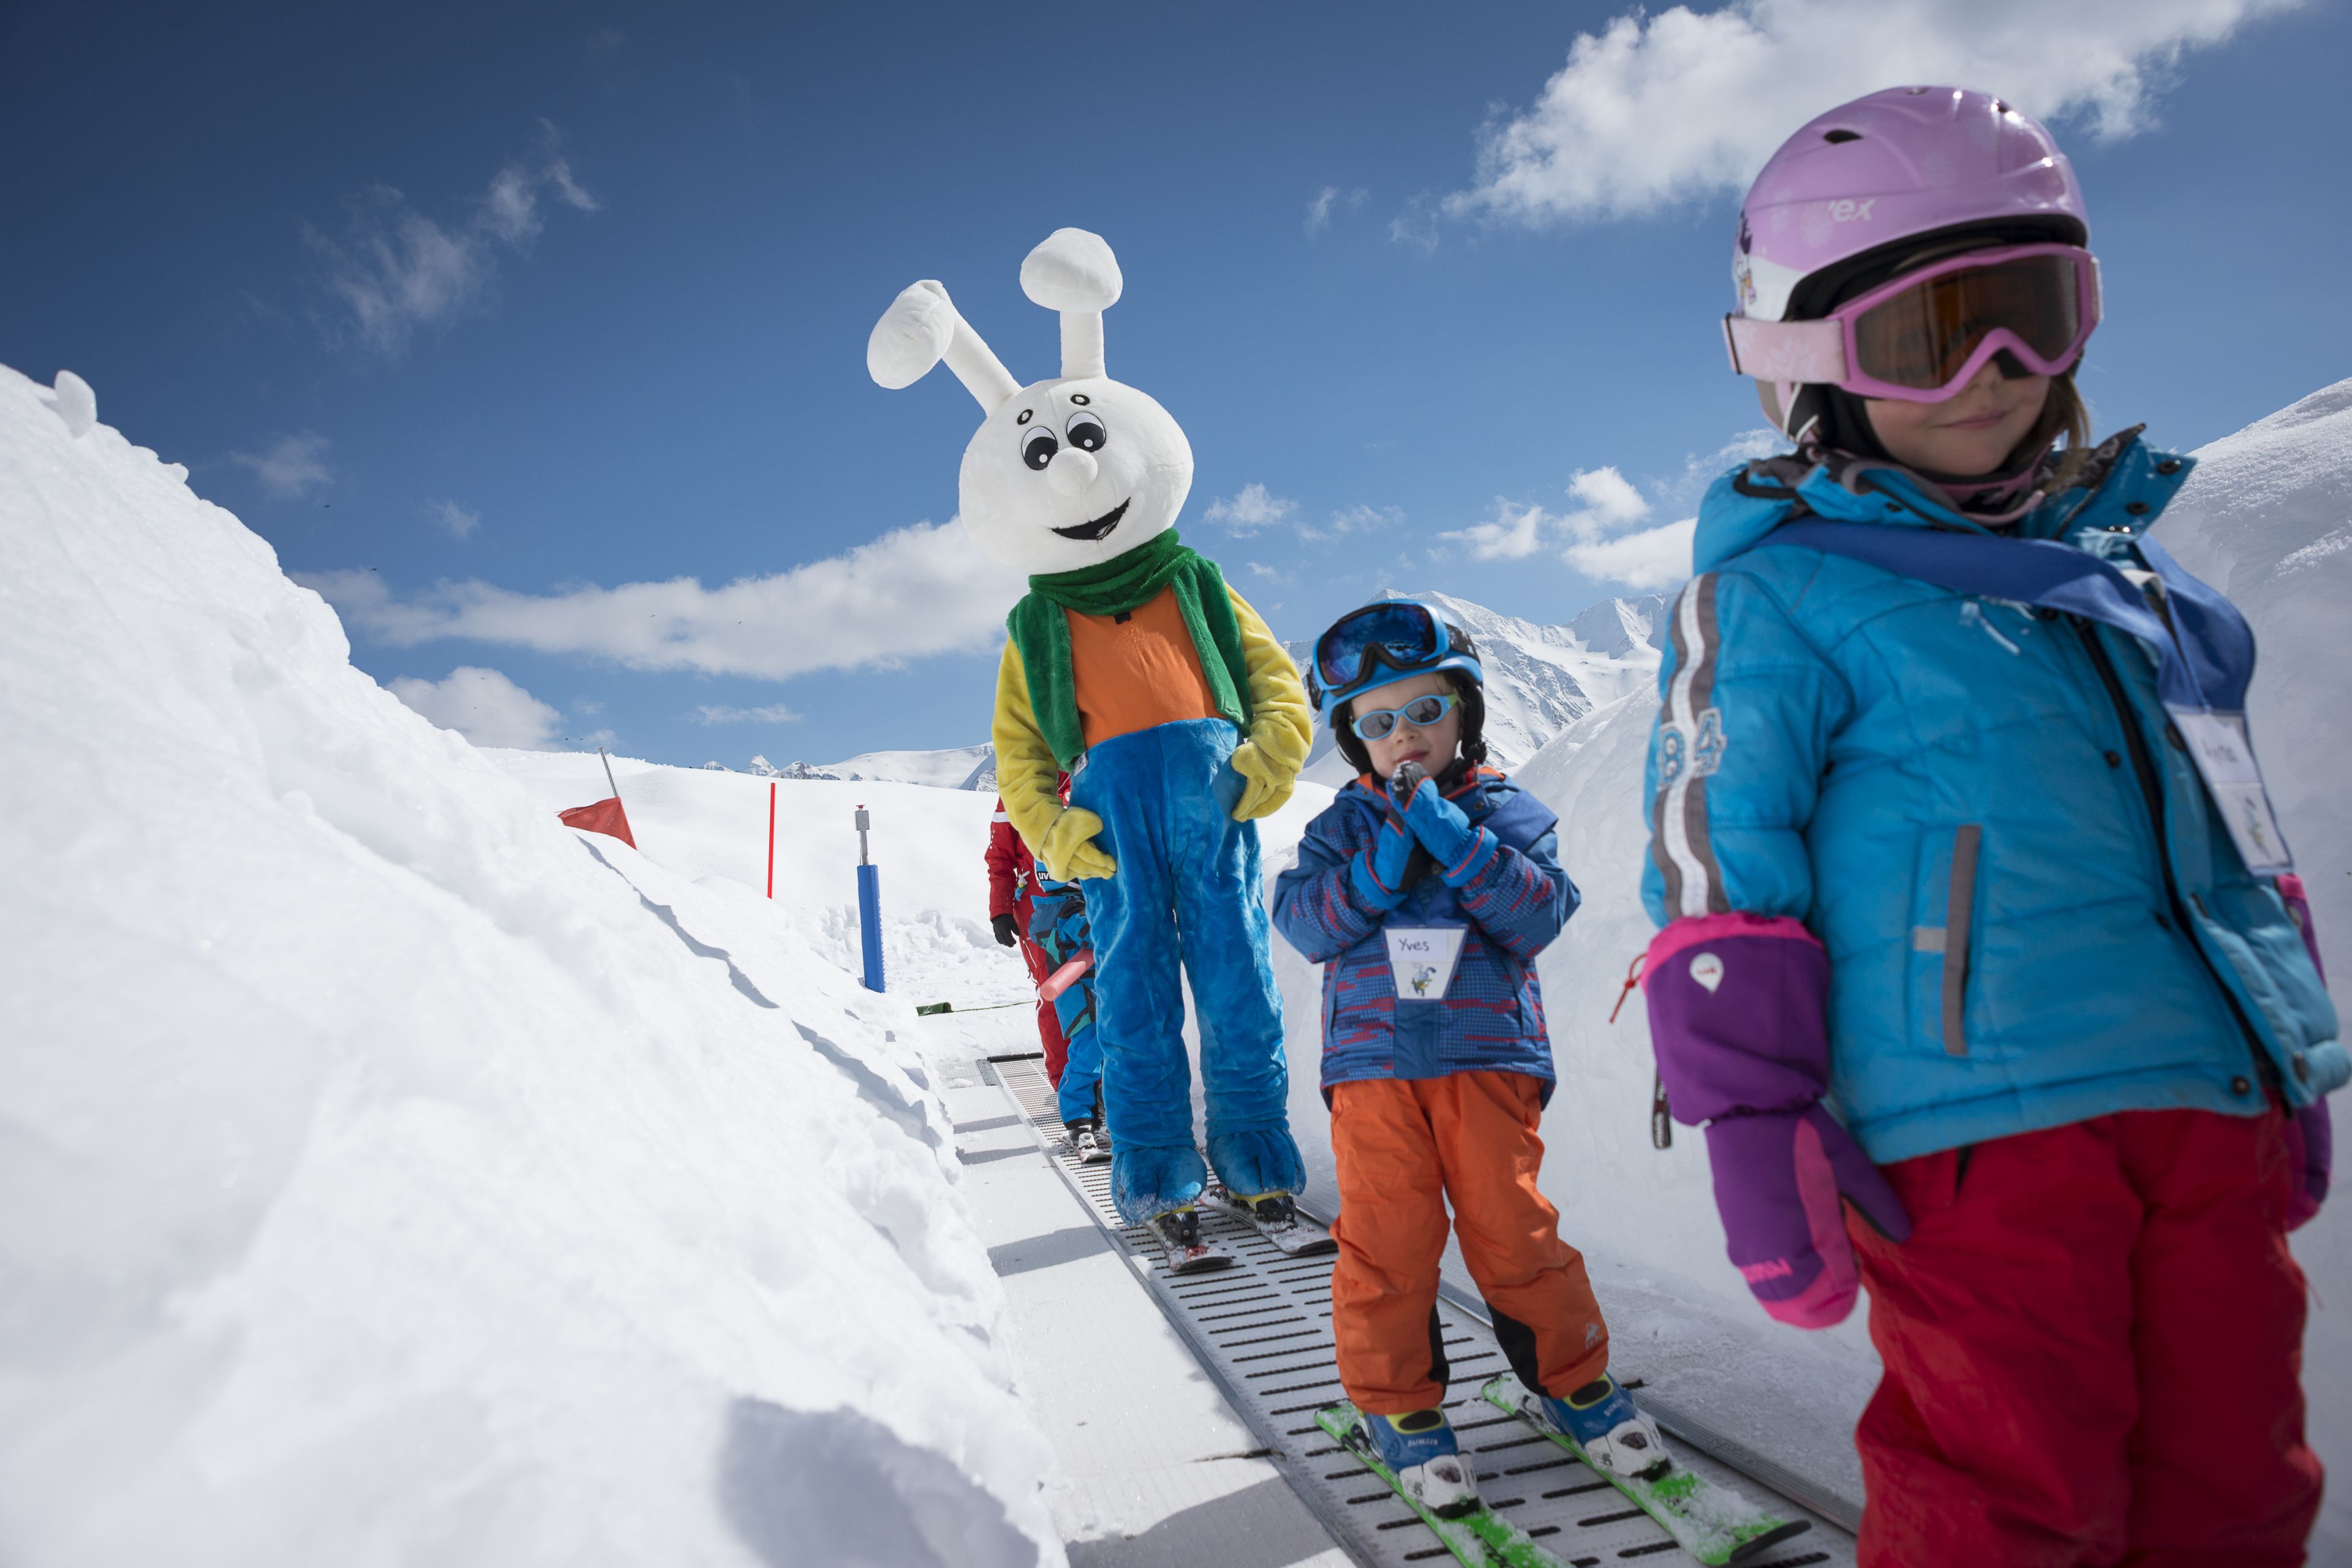 Snowli, the snow garden’s mascot, accompanies children on the magic carpet to the top of the gentle piste.